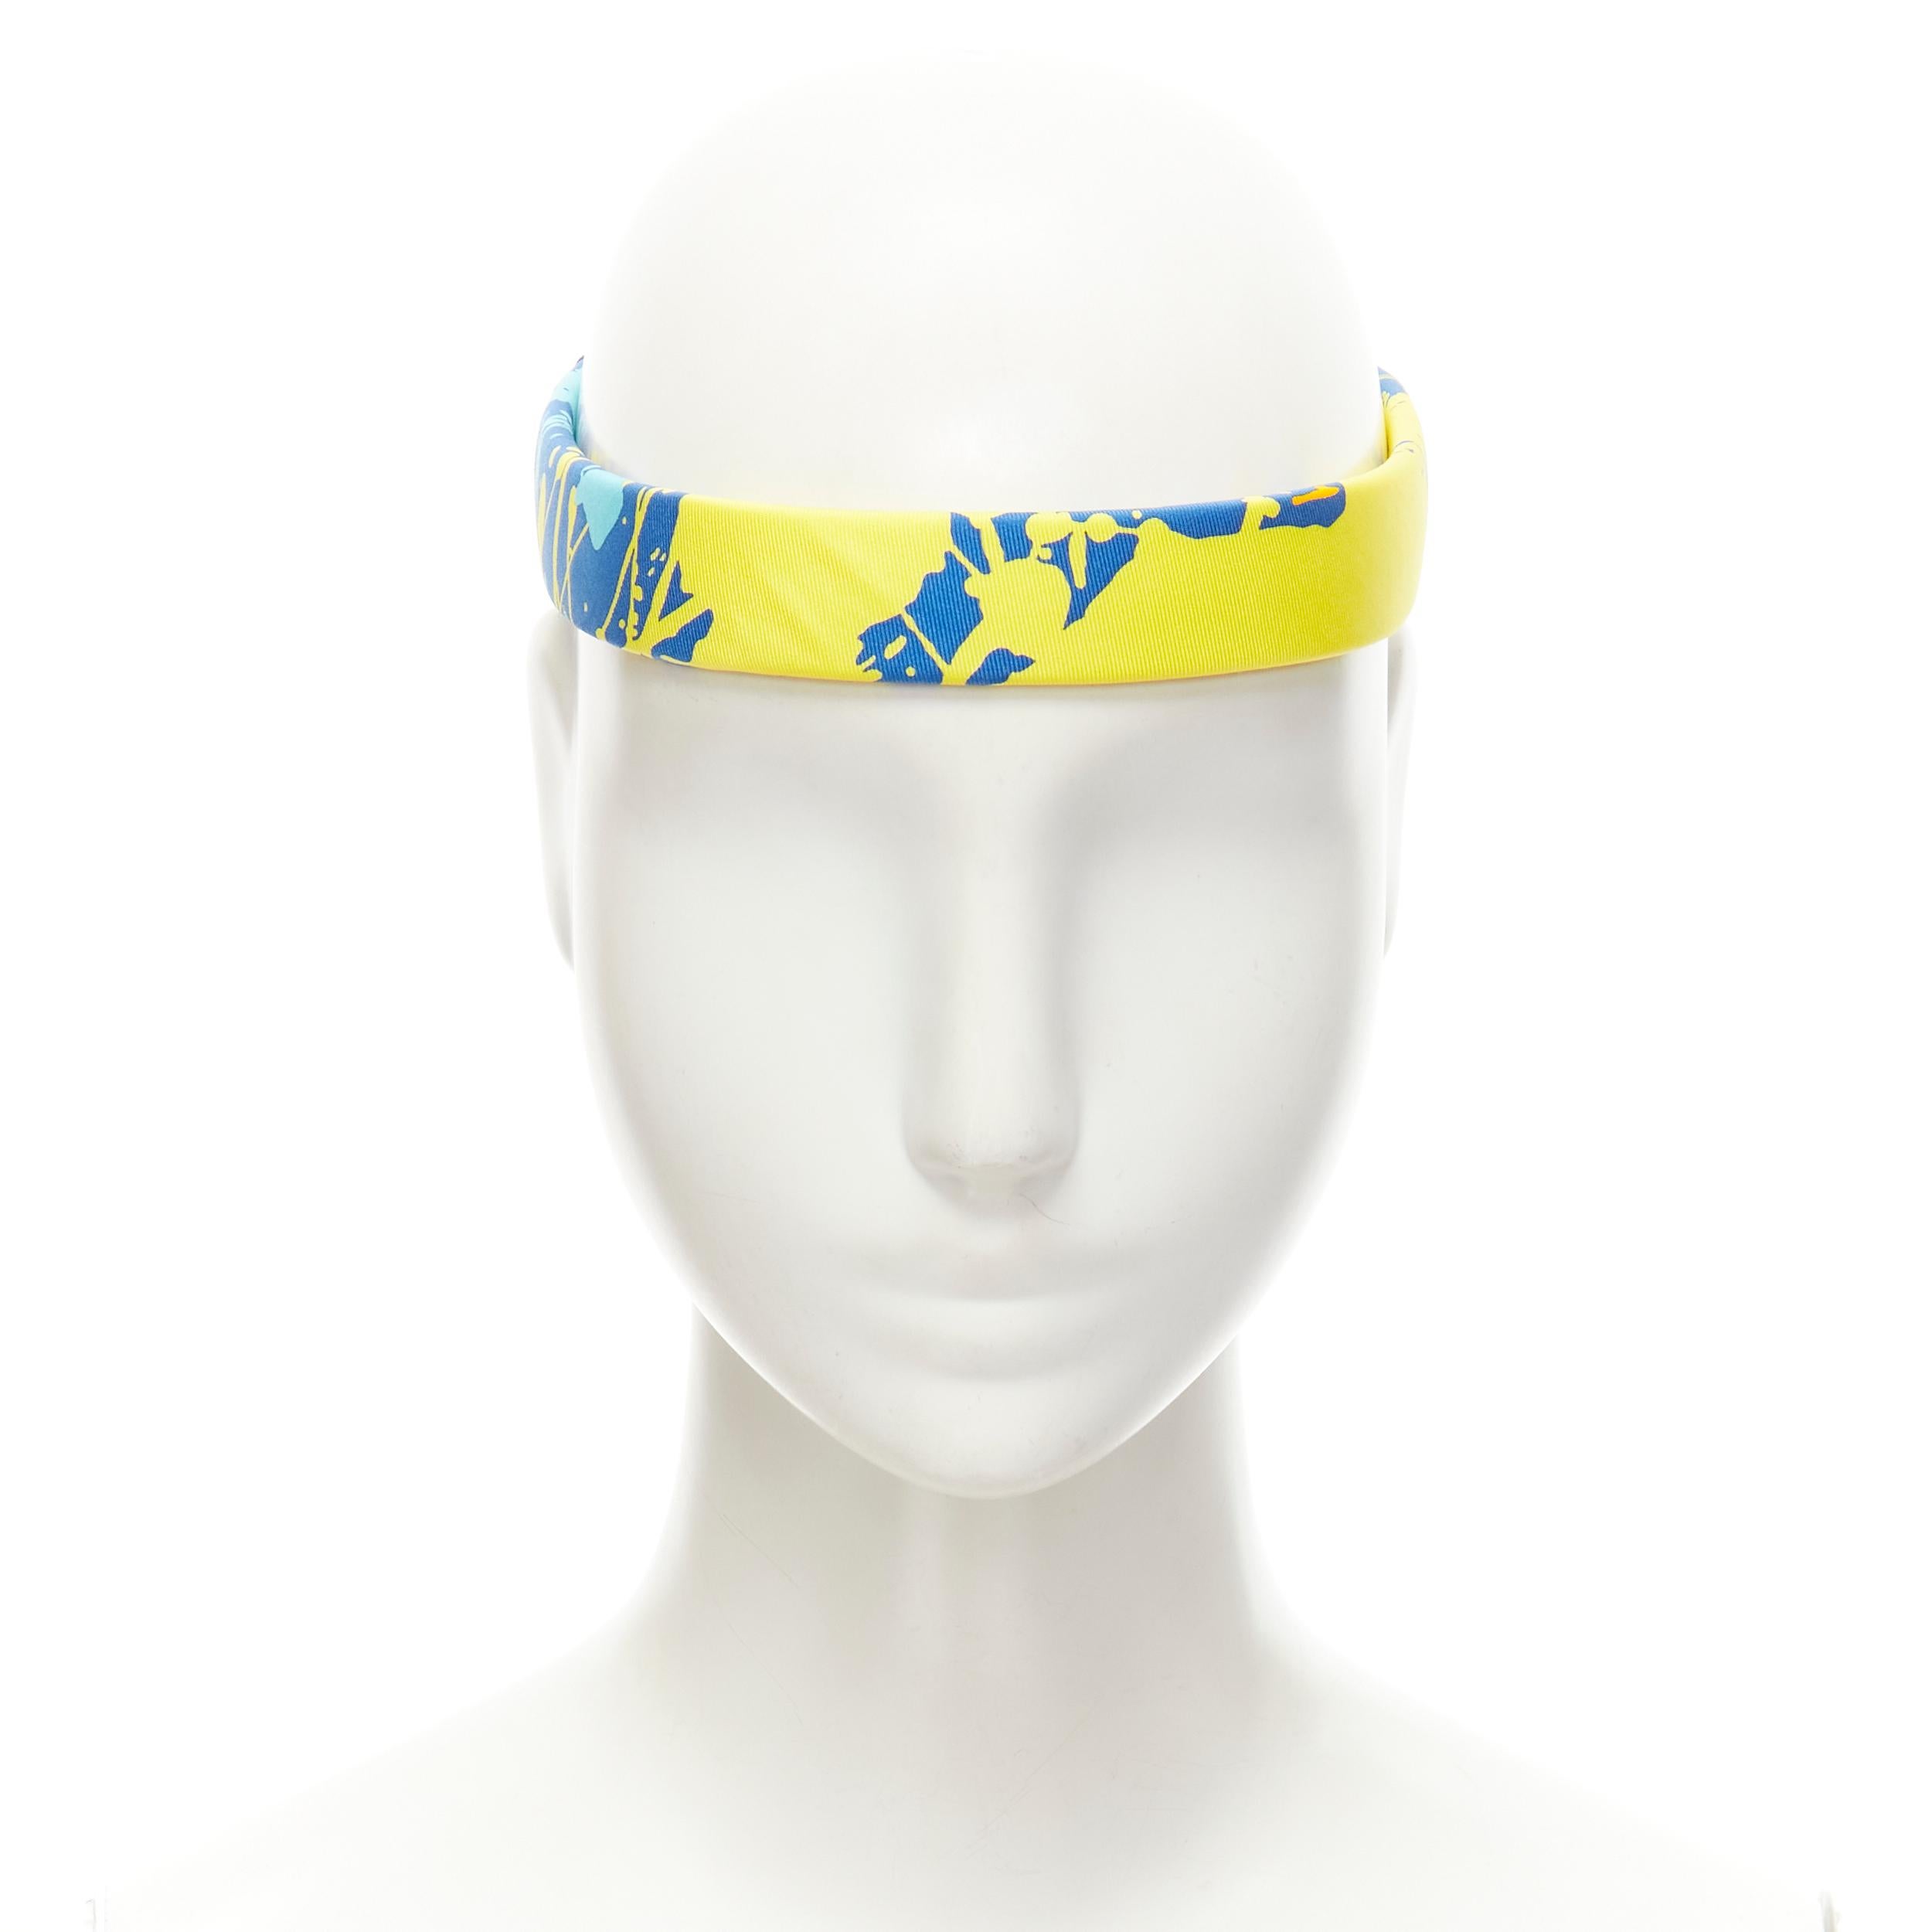 rare HERMES Bandeau Femme Mistinguette 100% silk blue yellow adjustable headband 
Reference: VACN/A00019 
Brand: Hermes 
Material: Silk 
Color: Blue 
Pattern: Abstract 
Closure: Adjustable 
Extra Detail: Adjustable to fit all sizes. 
Estimated